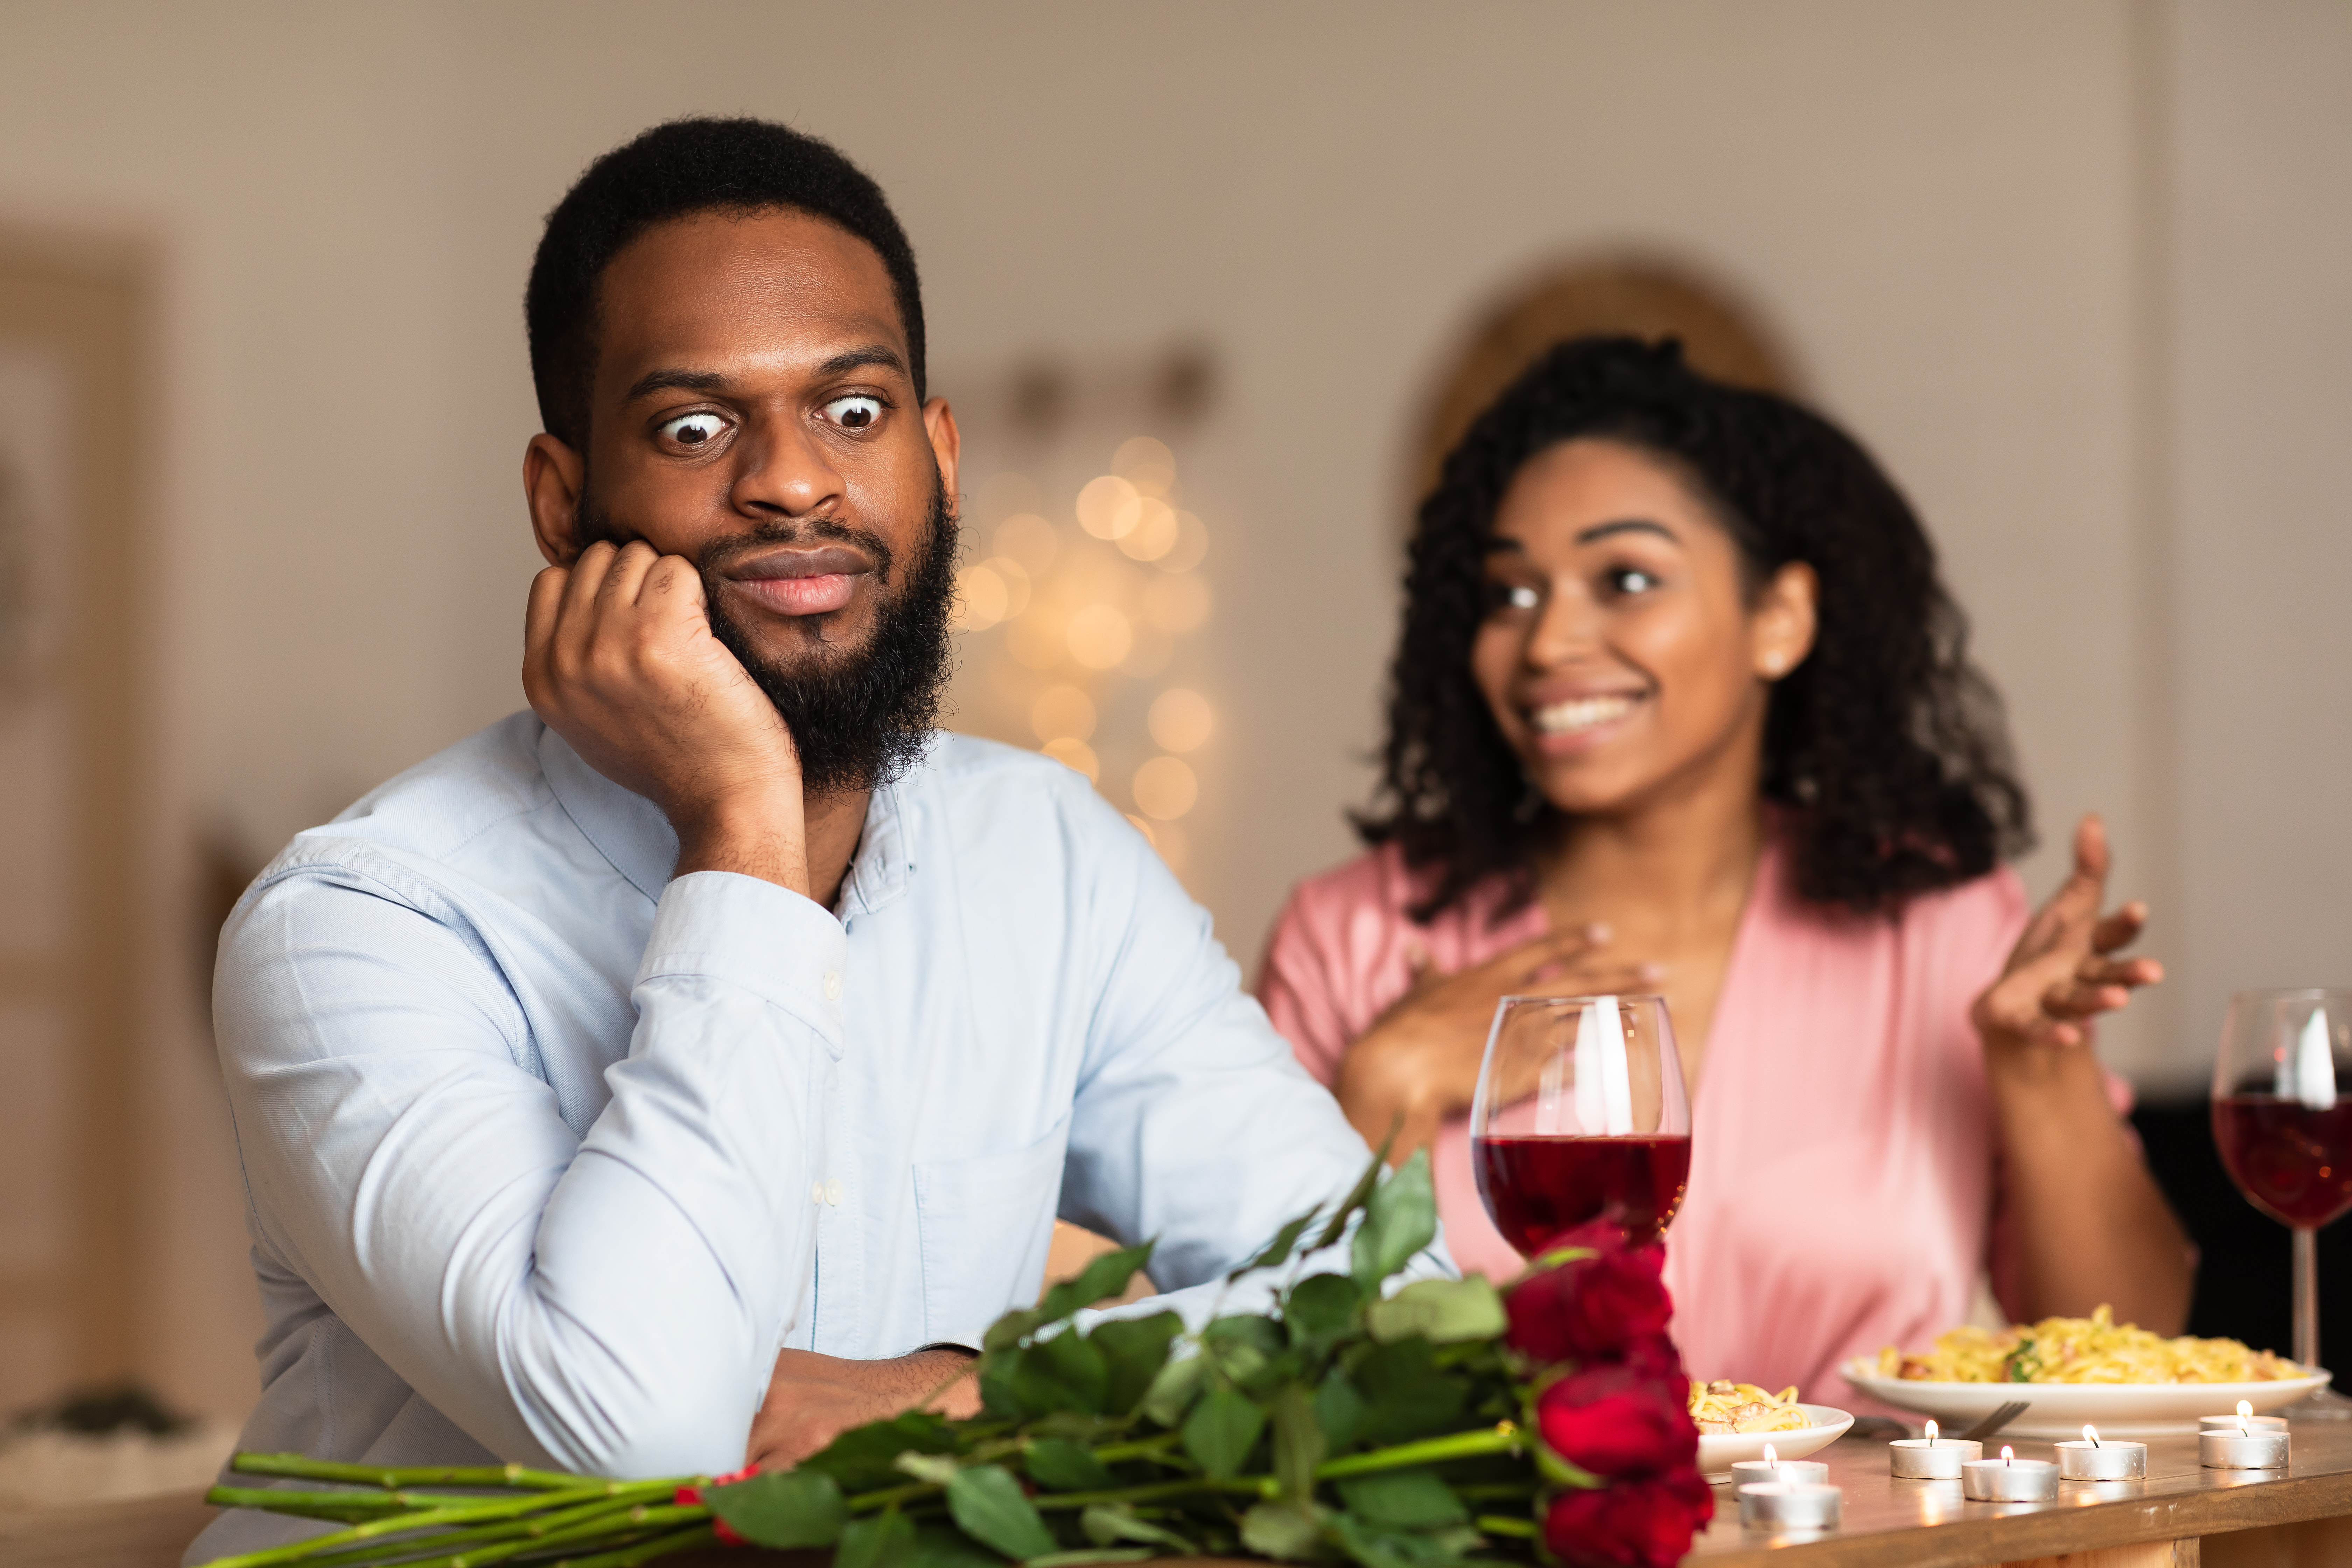 Dissatisfied shocked black man listening to an excited and emotional woman talking | Source: Shutterstock